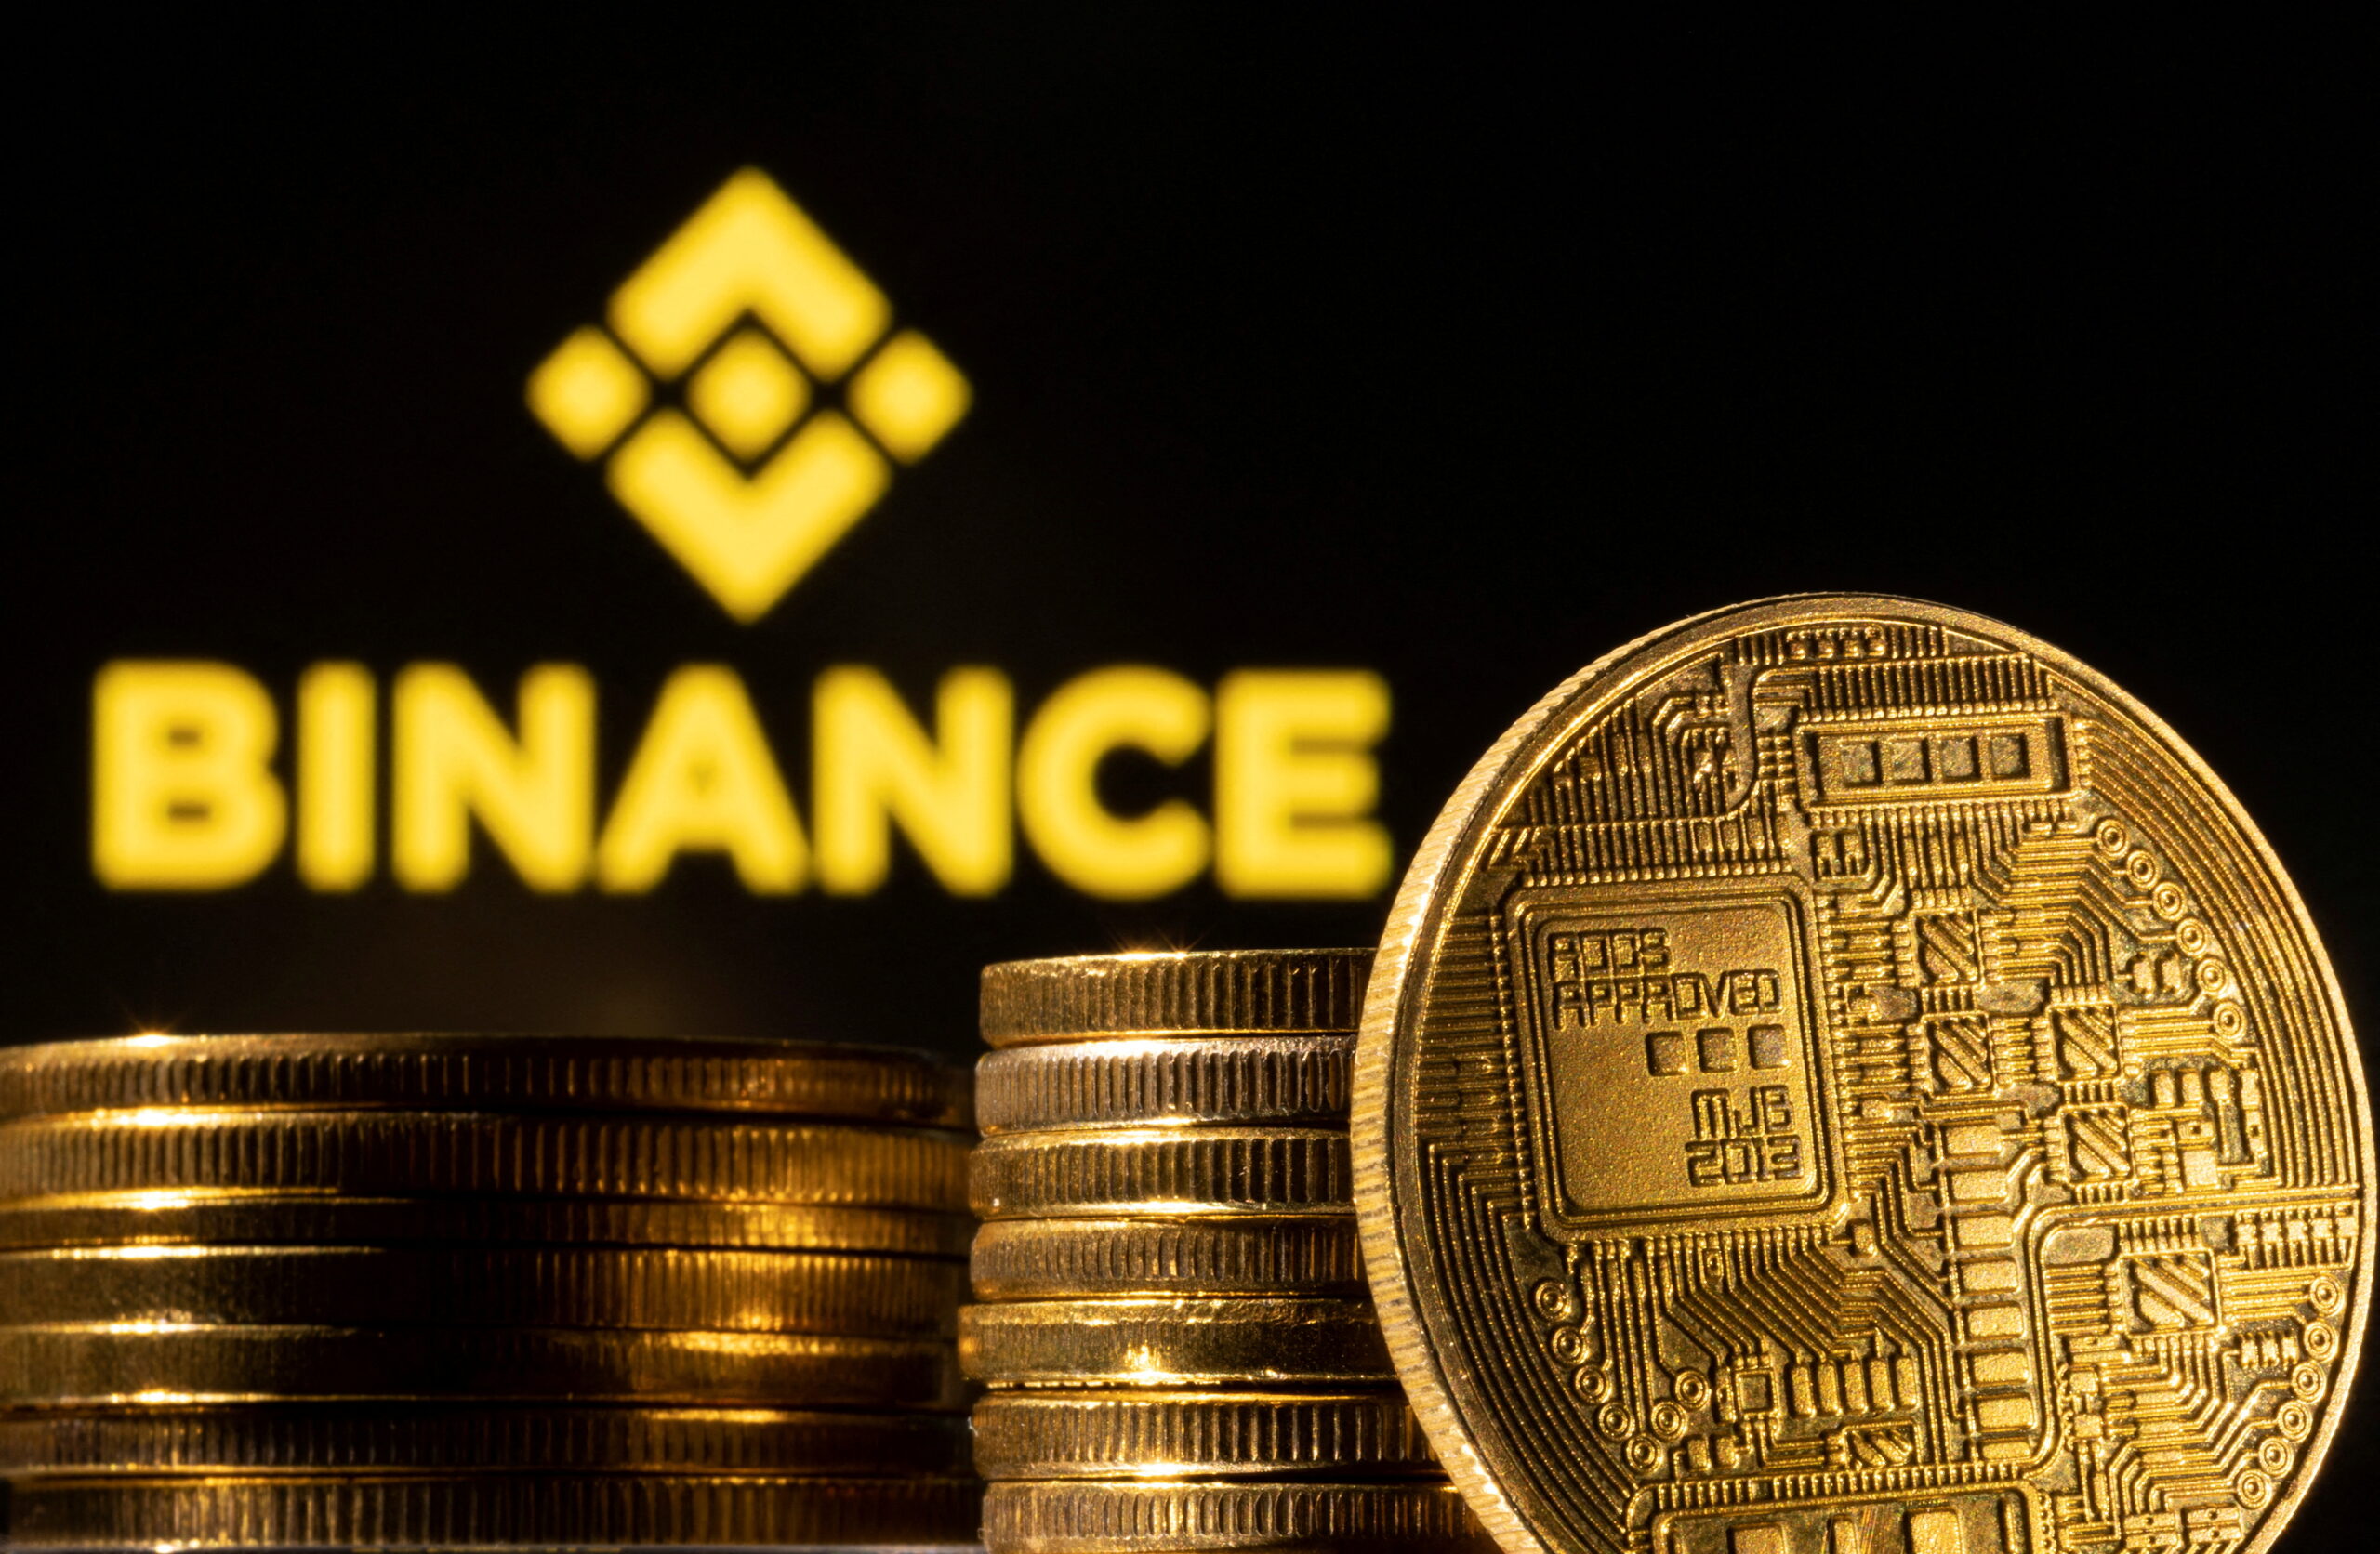 Binance has announced that it has added support for more African currencies.